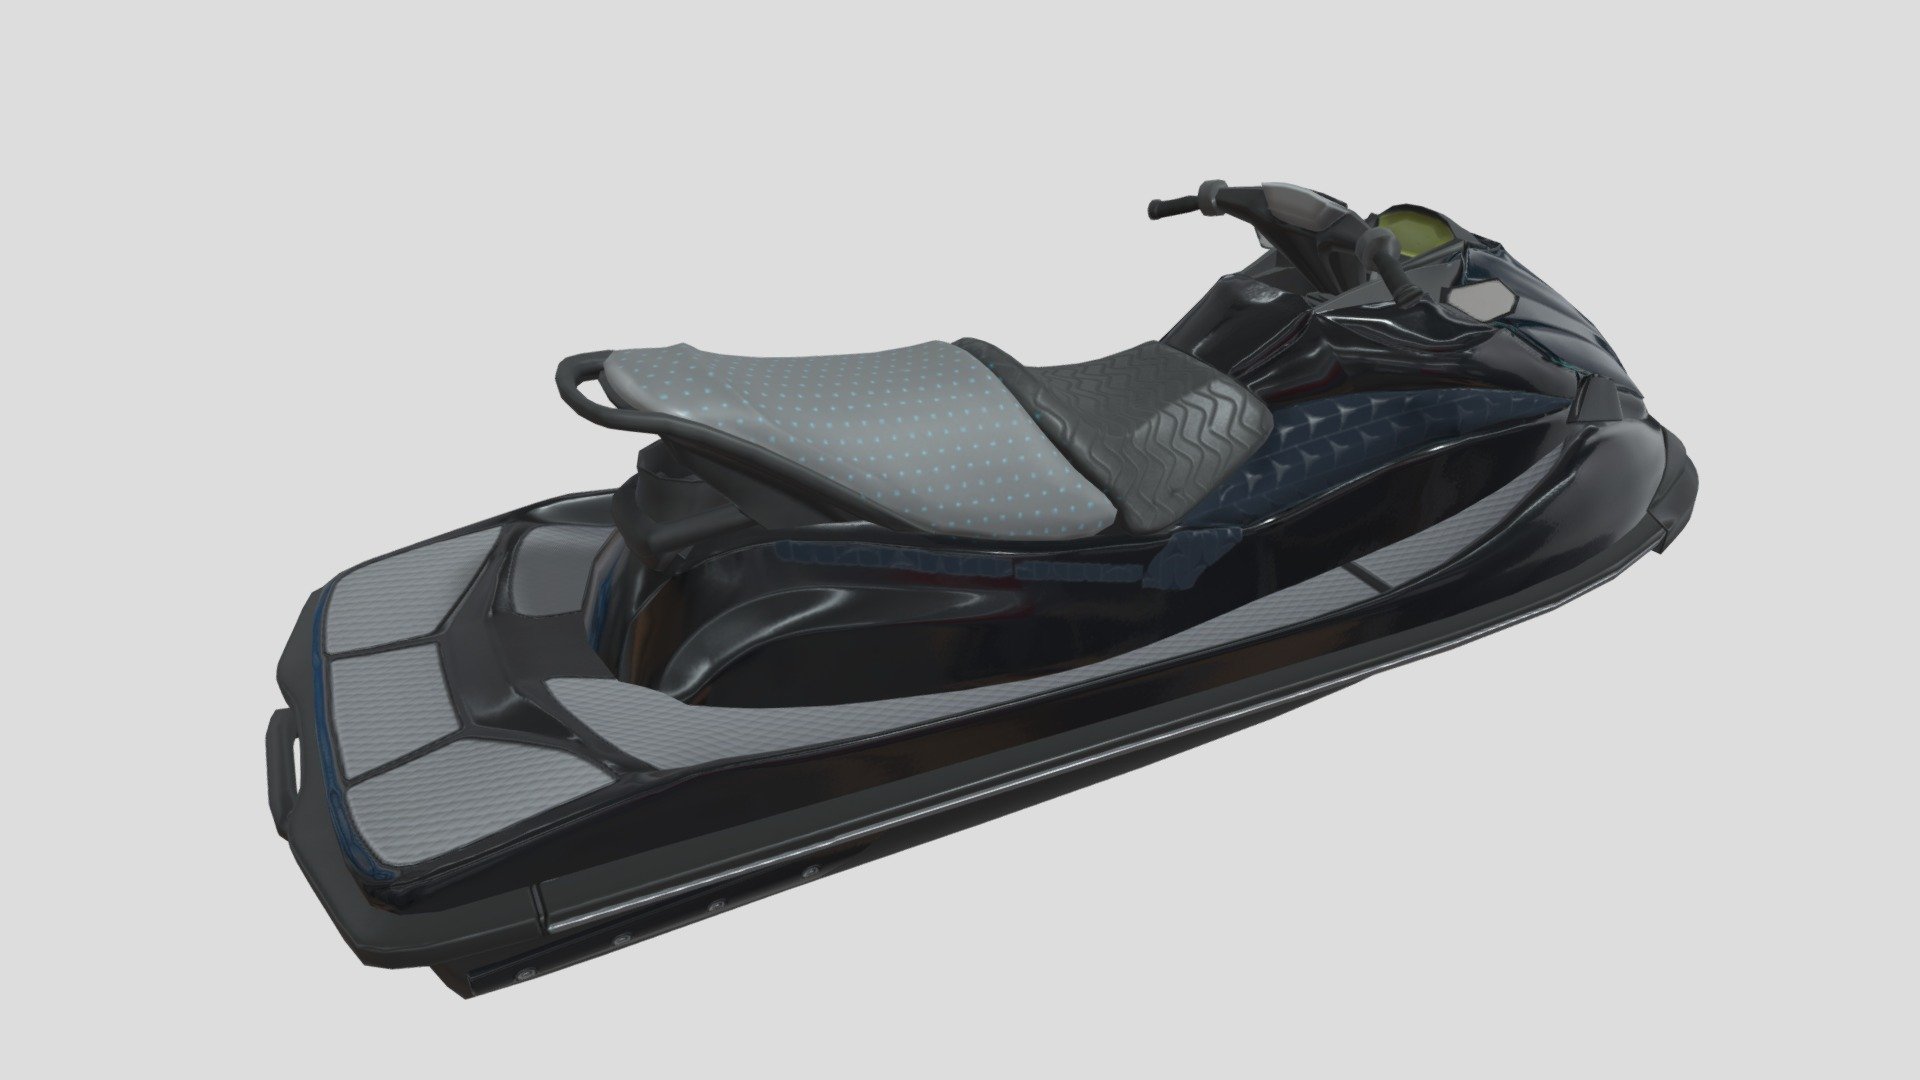 3d model of a Jetski. Perfect for games, scenes or renders.

Model is correctly divided into main parts. All main parts are presented as separate parts therefore materials of objects are easy to be modified or removed and standard parts are easy to be replaced.

TEXTURES: Models includes high textures with maps: Base Color (.png) Height (.png) Metallic (.png) Normal (.png) Roughness (.png)

FORMATS: .obj .dae .stl .blend .fbx .3ds

GENERAL: Easy editable. Model is fully textured.

Vertices: 14.1 k Polygons: 13.2k

All formats have been tested and work correctly.

Some files may need textures or materials adjusted or added depending on the program they are imported into 3d model